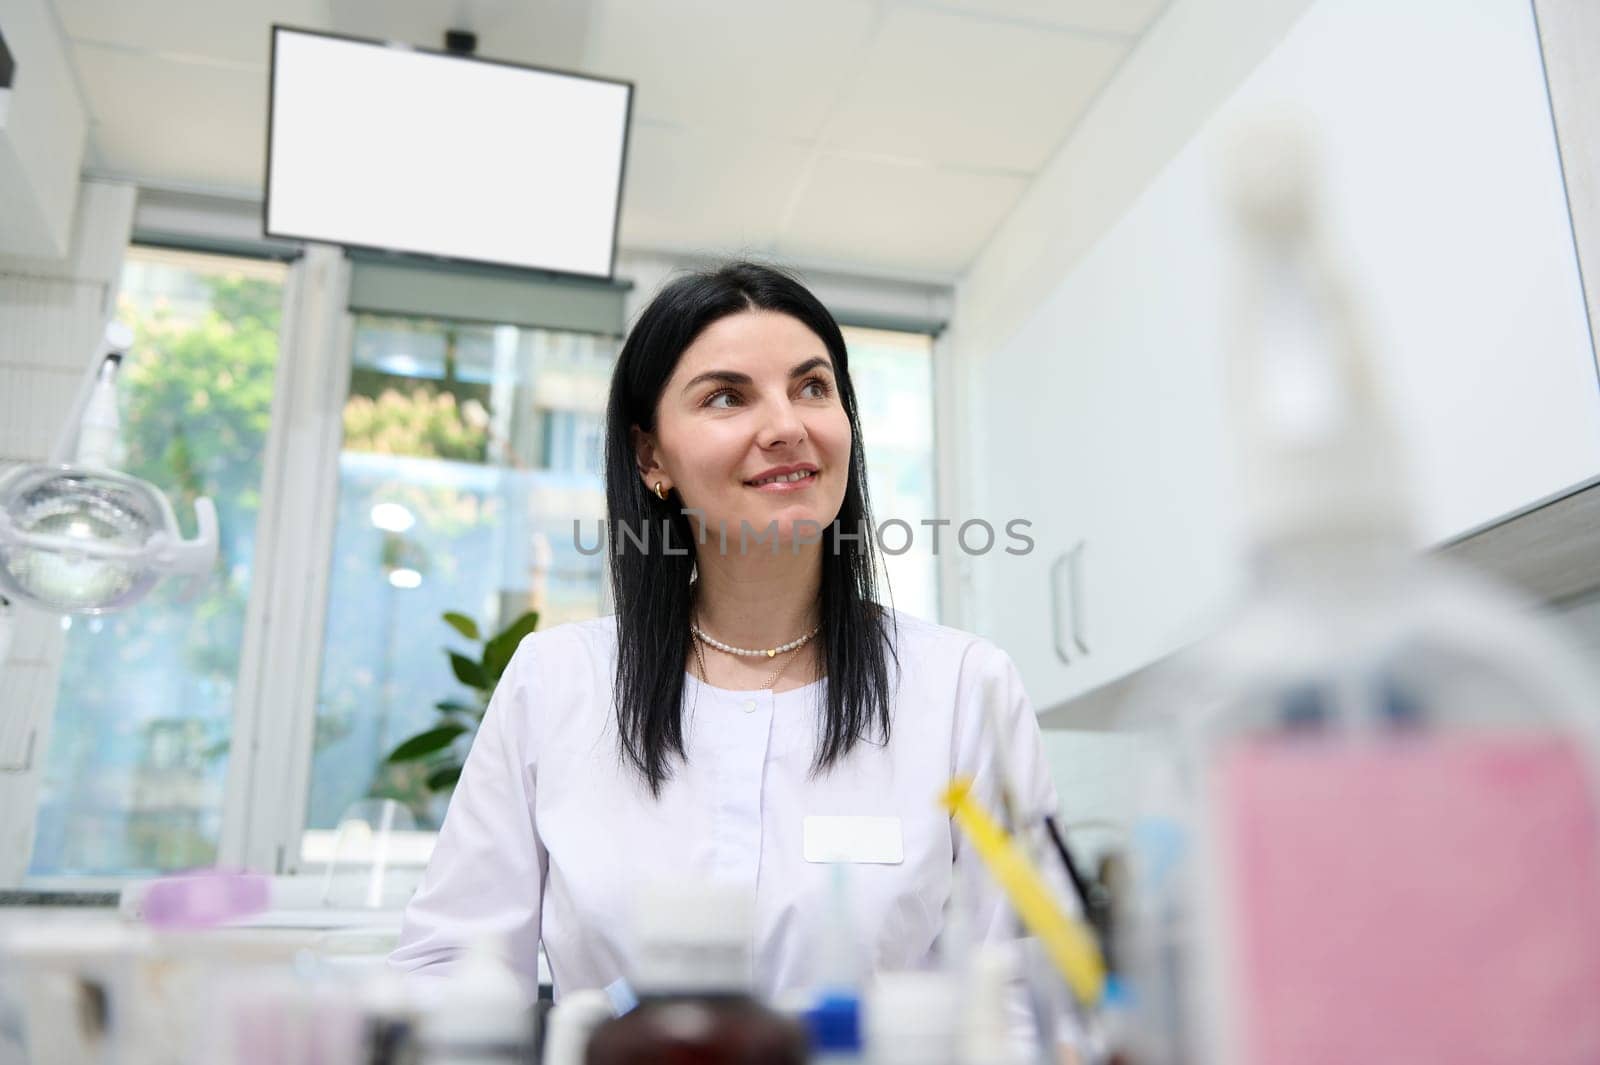 Smiling beautiful female dental hygienist at workplace in dentist's office. Orthodontics. Dentistry. Dental practice by artgf